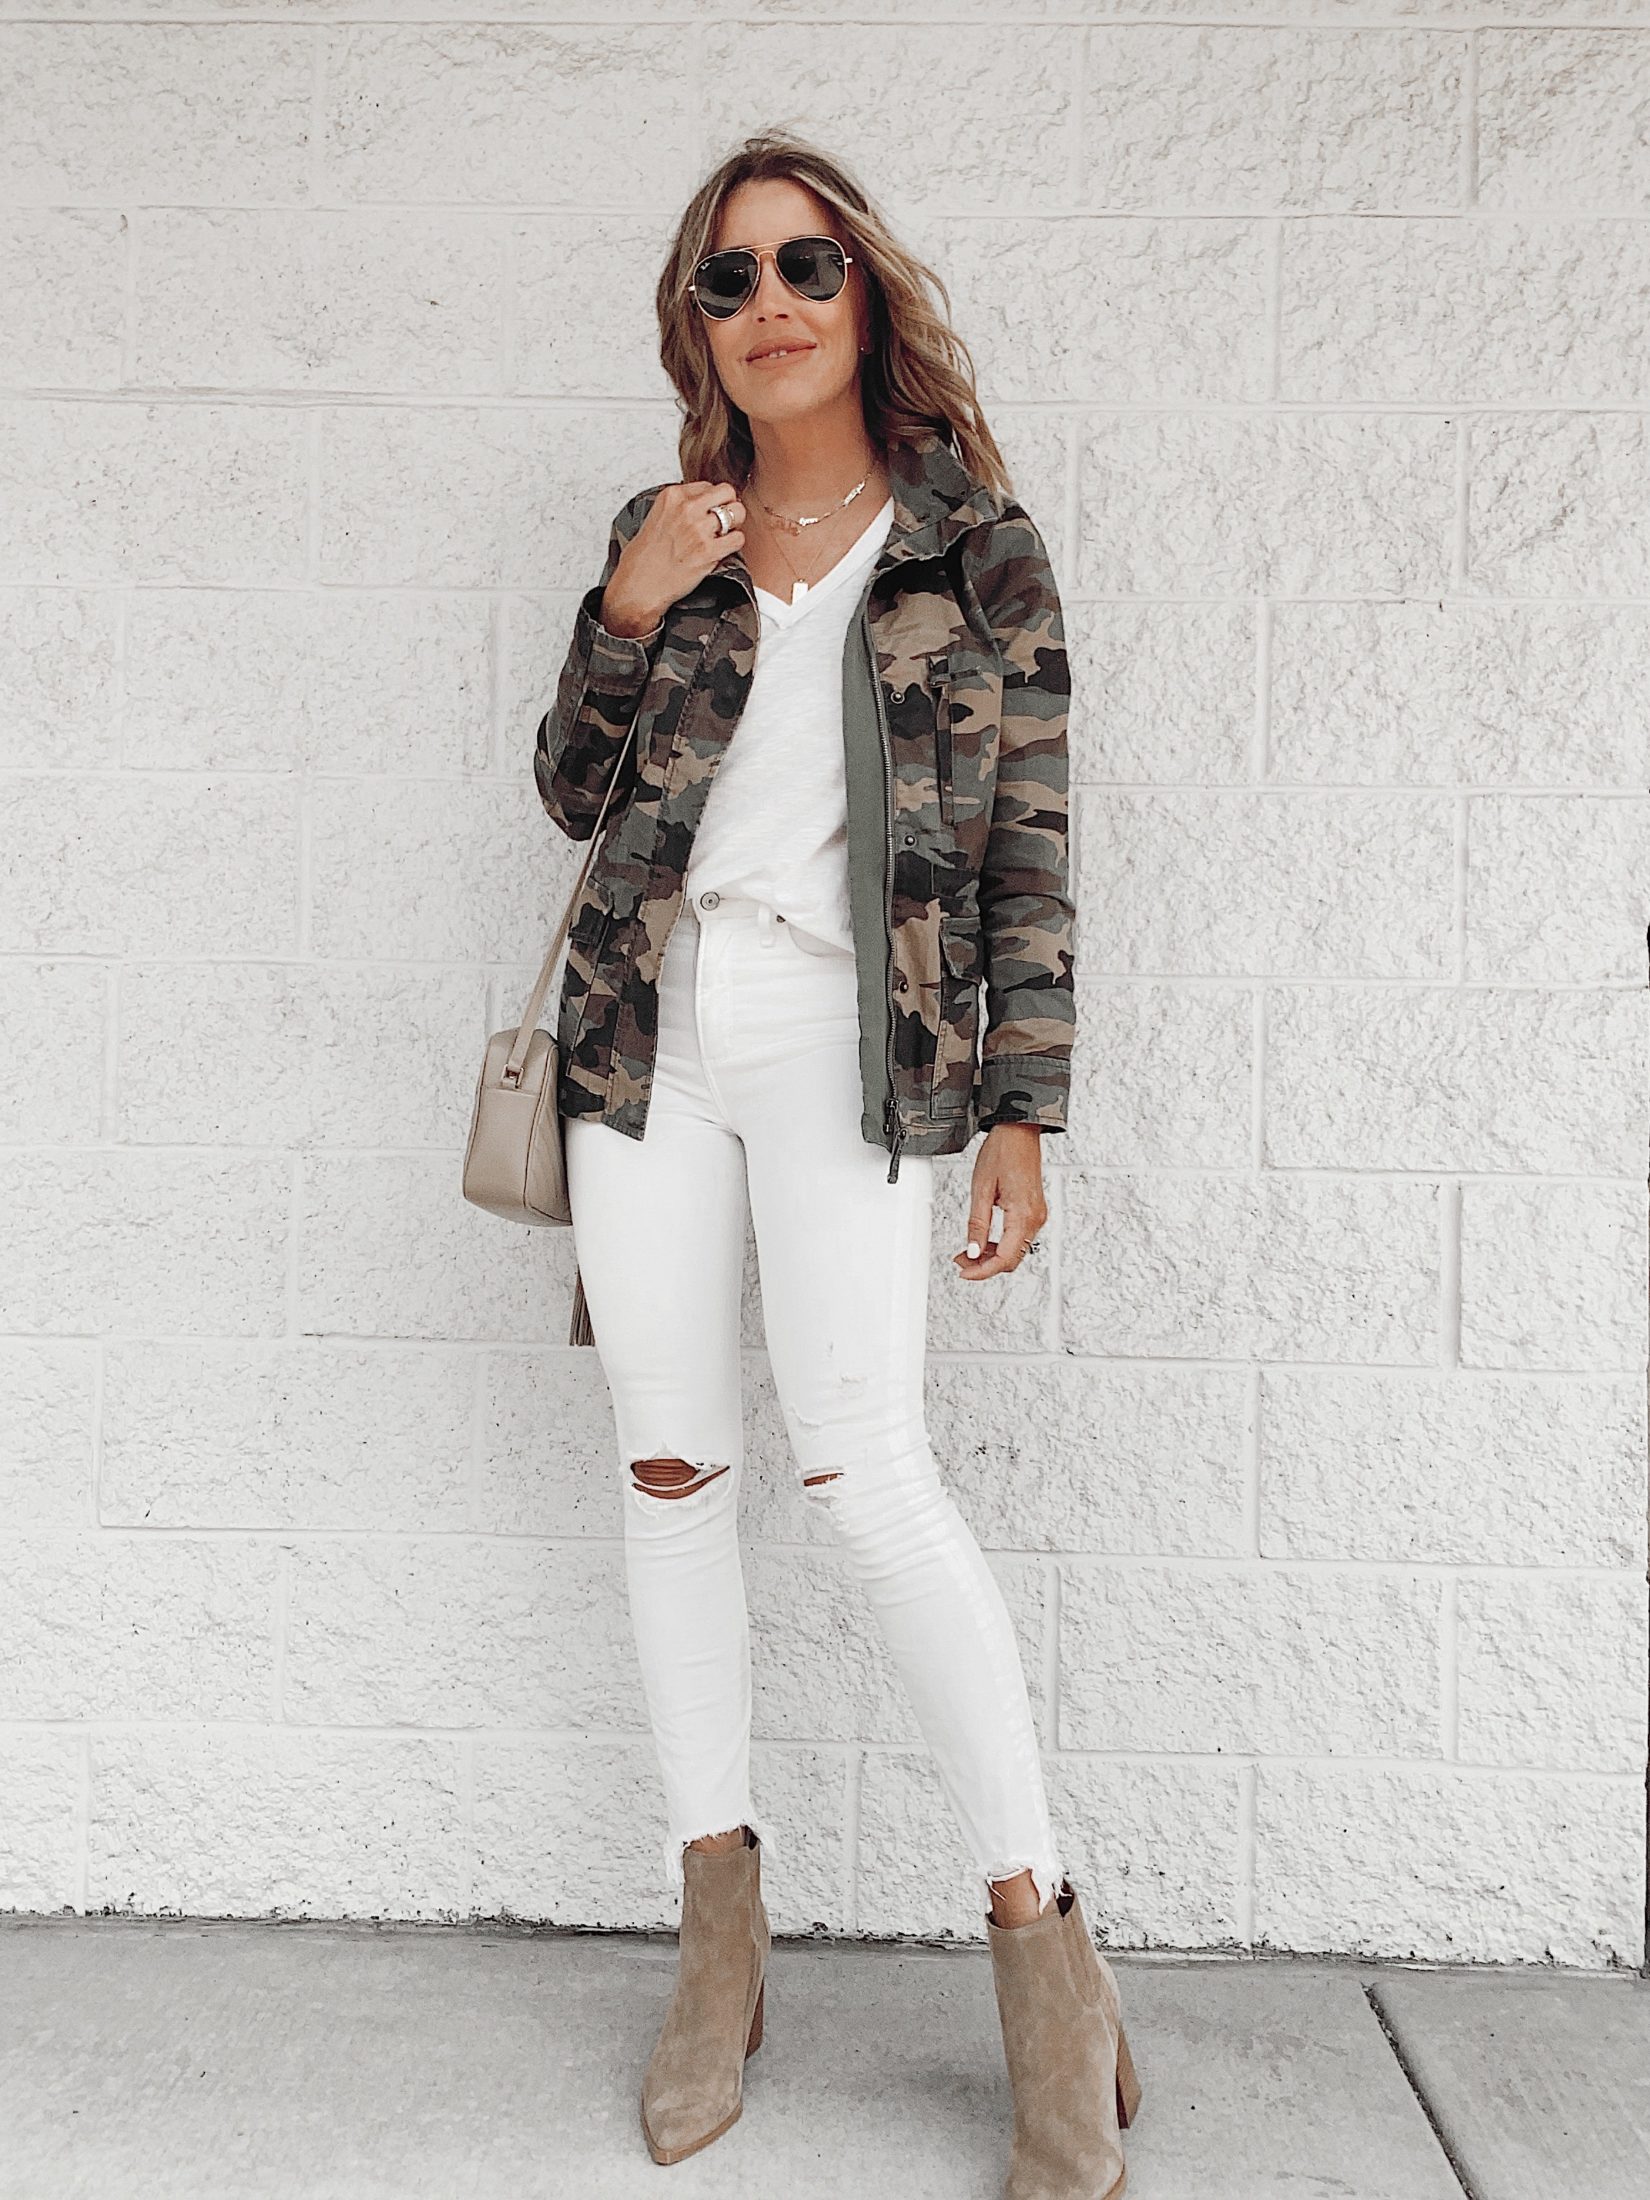 jaime shrayber styling madewell camo jacket with white jeans for fall 2020